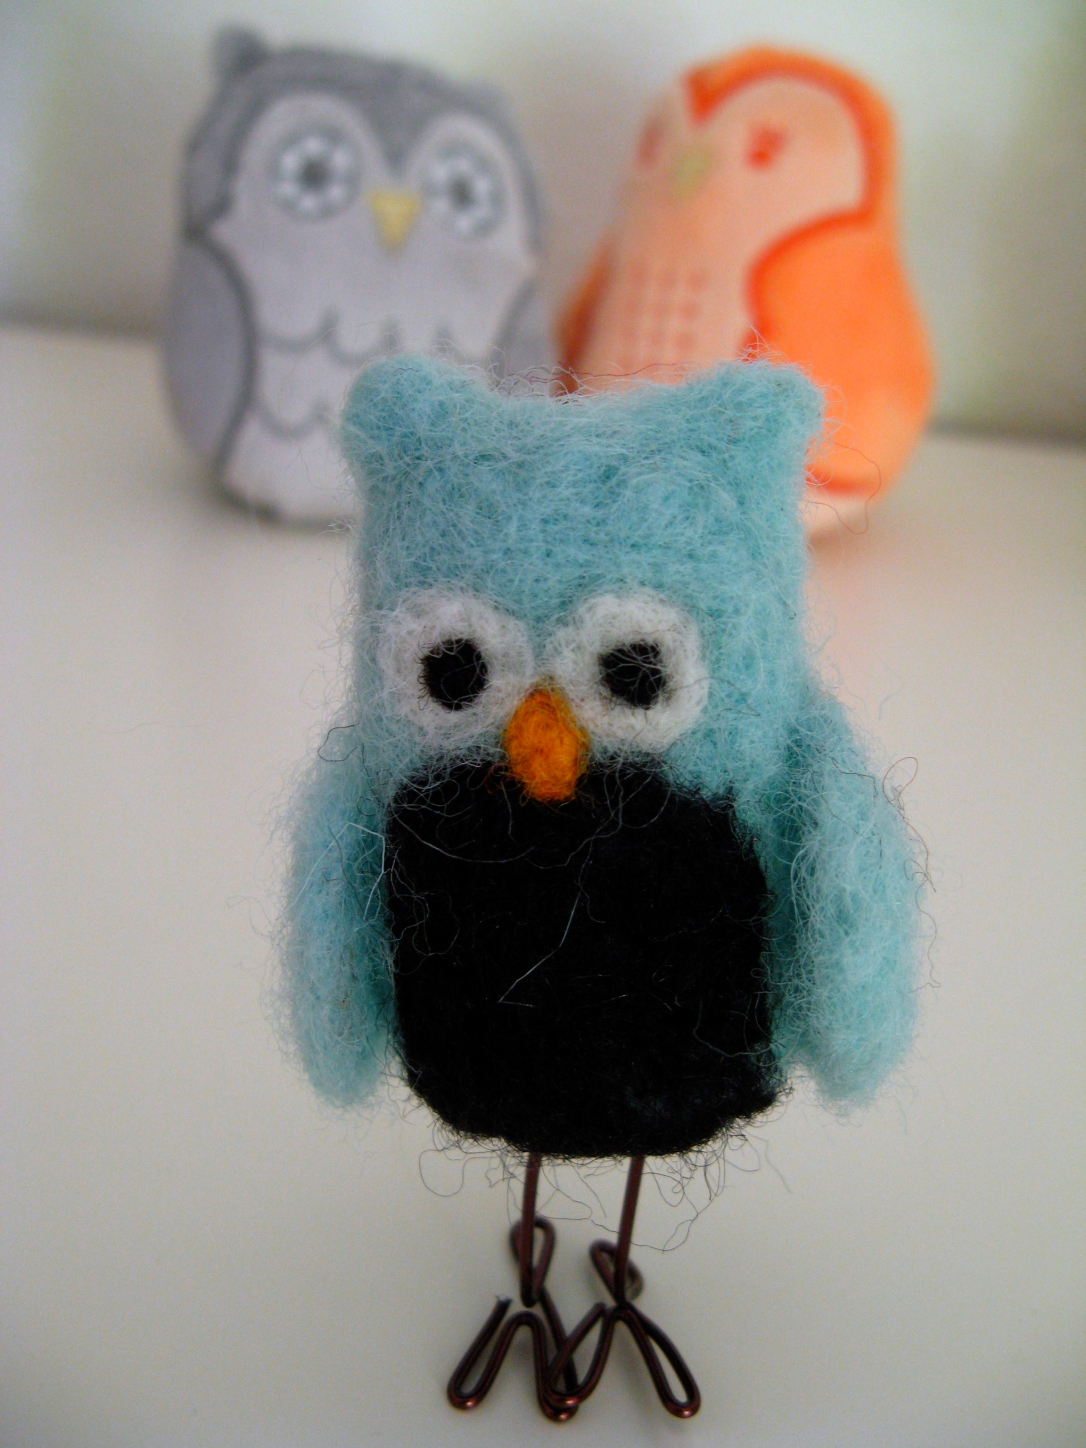 Handmade Felted Owl from BlissFull Essence / Evenswood Owlbums (Urban Outfitters Plush Owlets in the background) - Oaxacaborn - Aveline's room